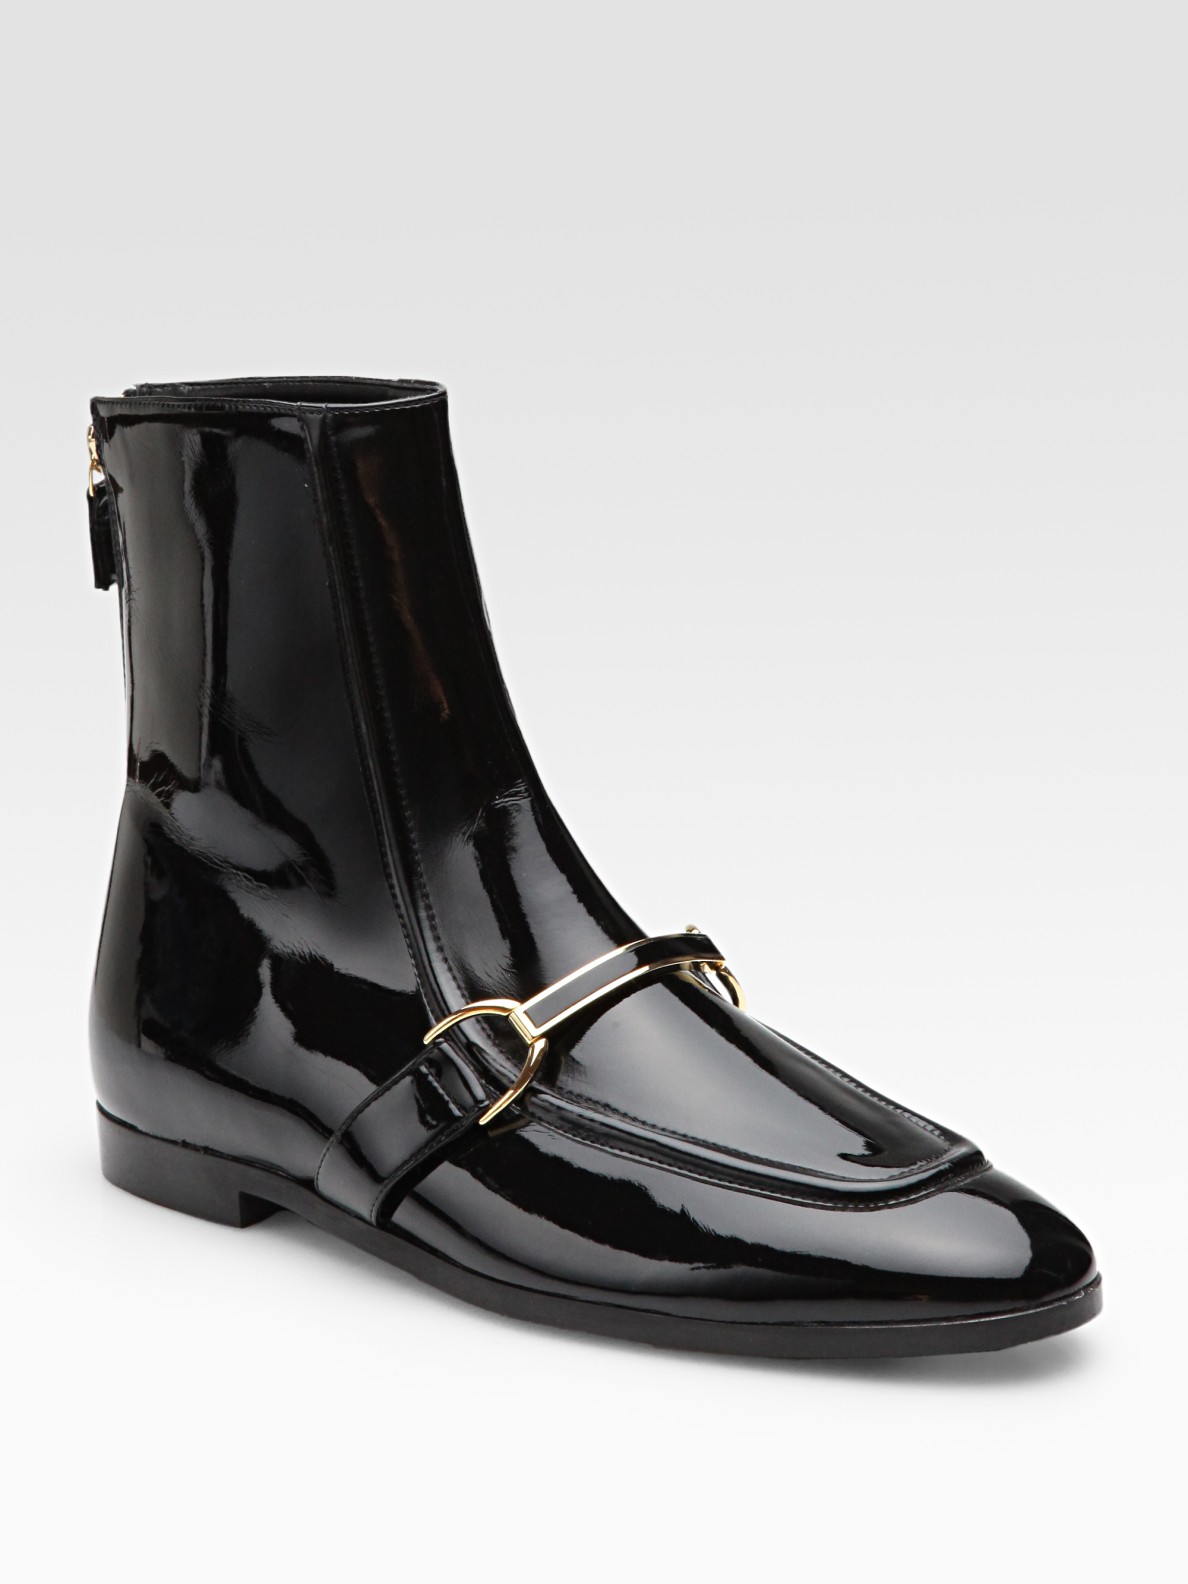 Stella Mccartney Faux Patent Leather Buckle Ankle Boots in Black | Lyst